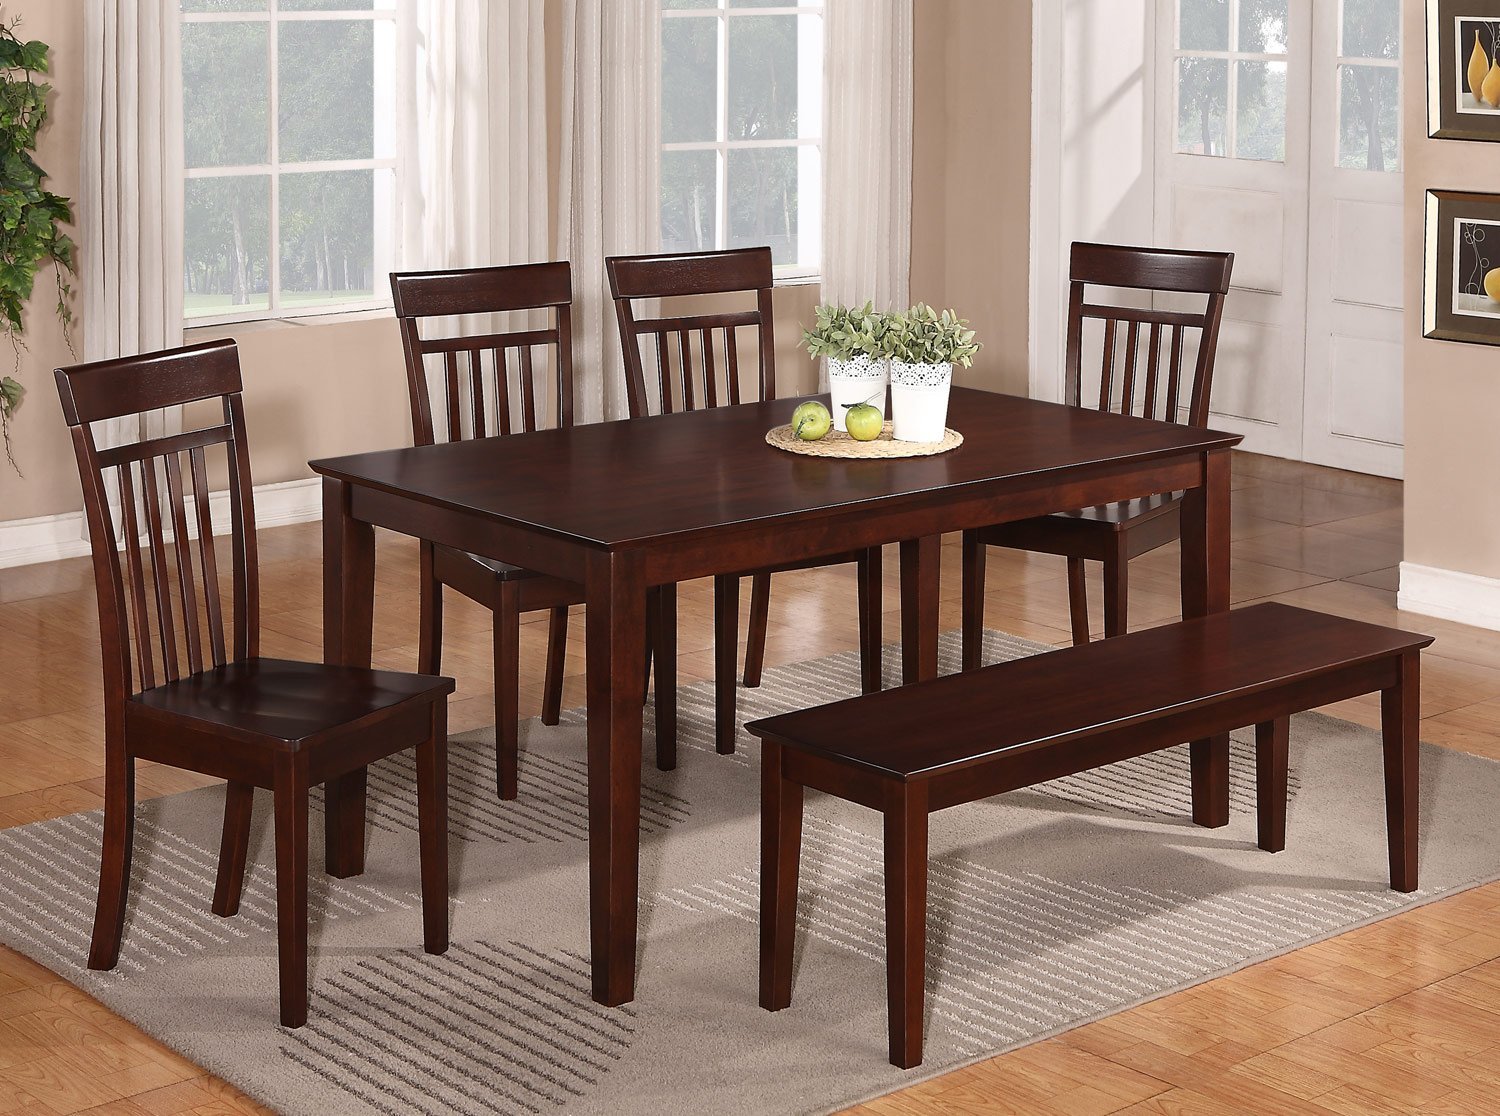 36x60 dining room table sets